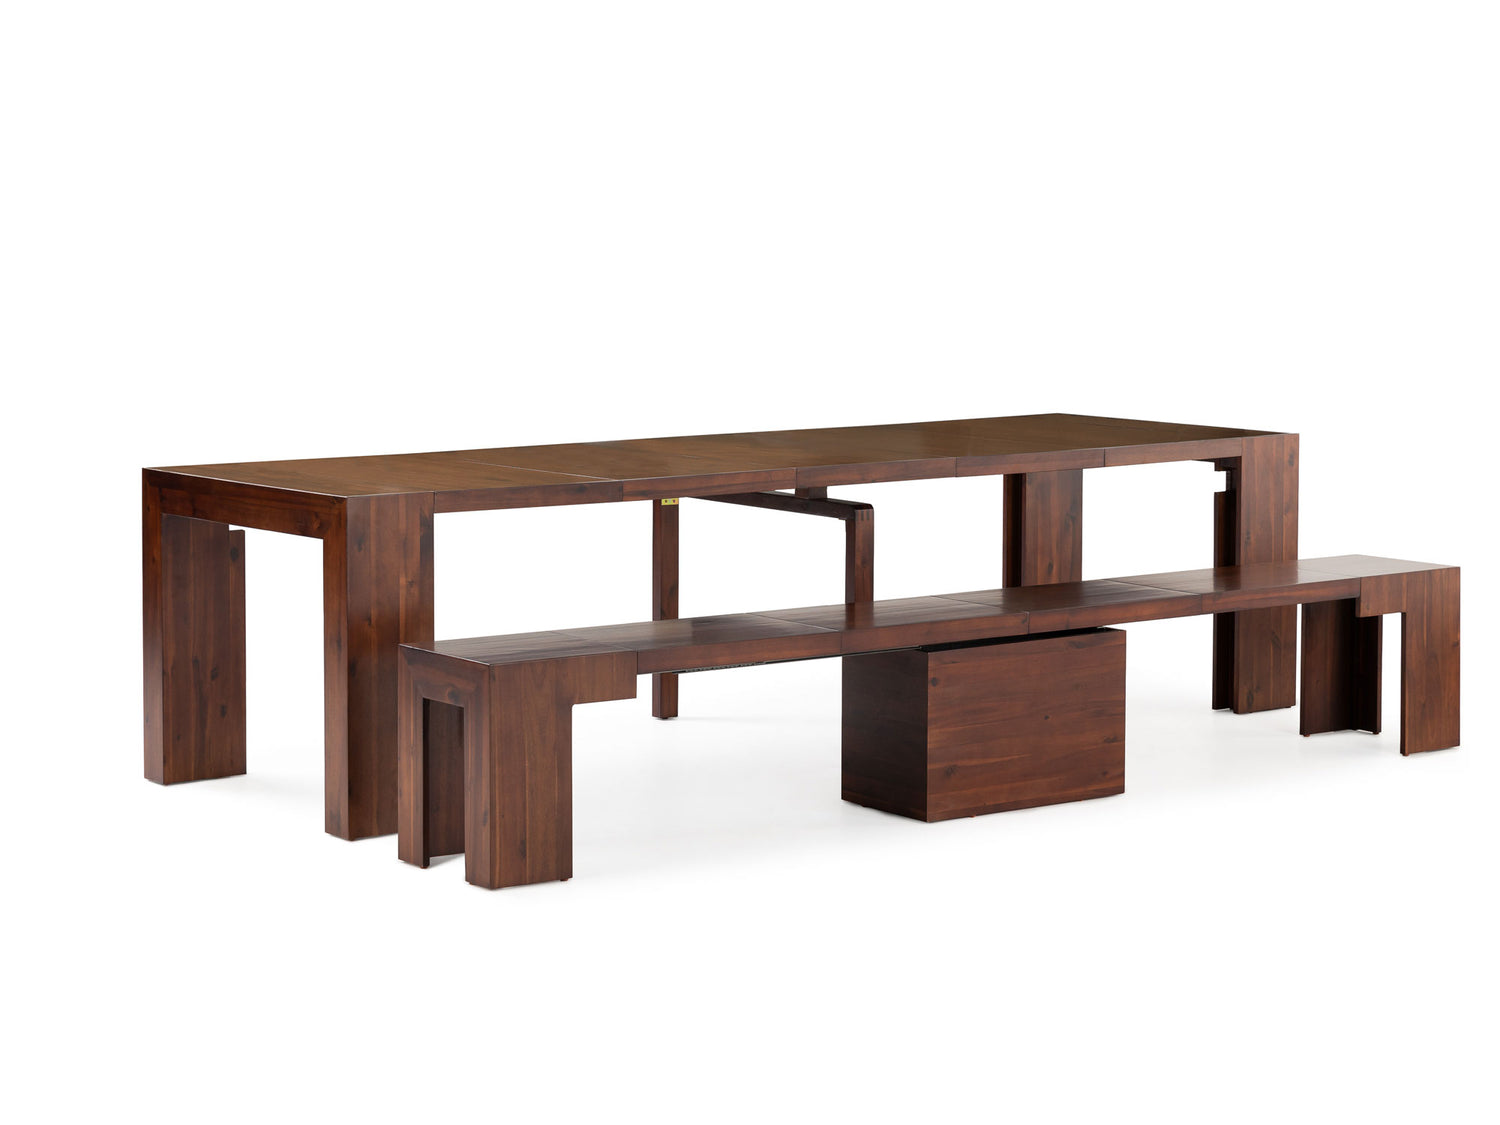 American Mahogany::Gallery::American Mahogany Transformer Table Shown with Removable Panels